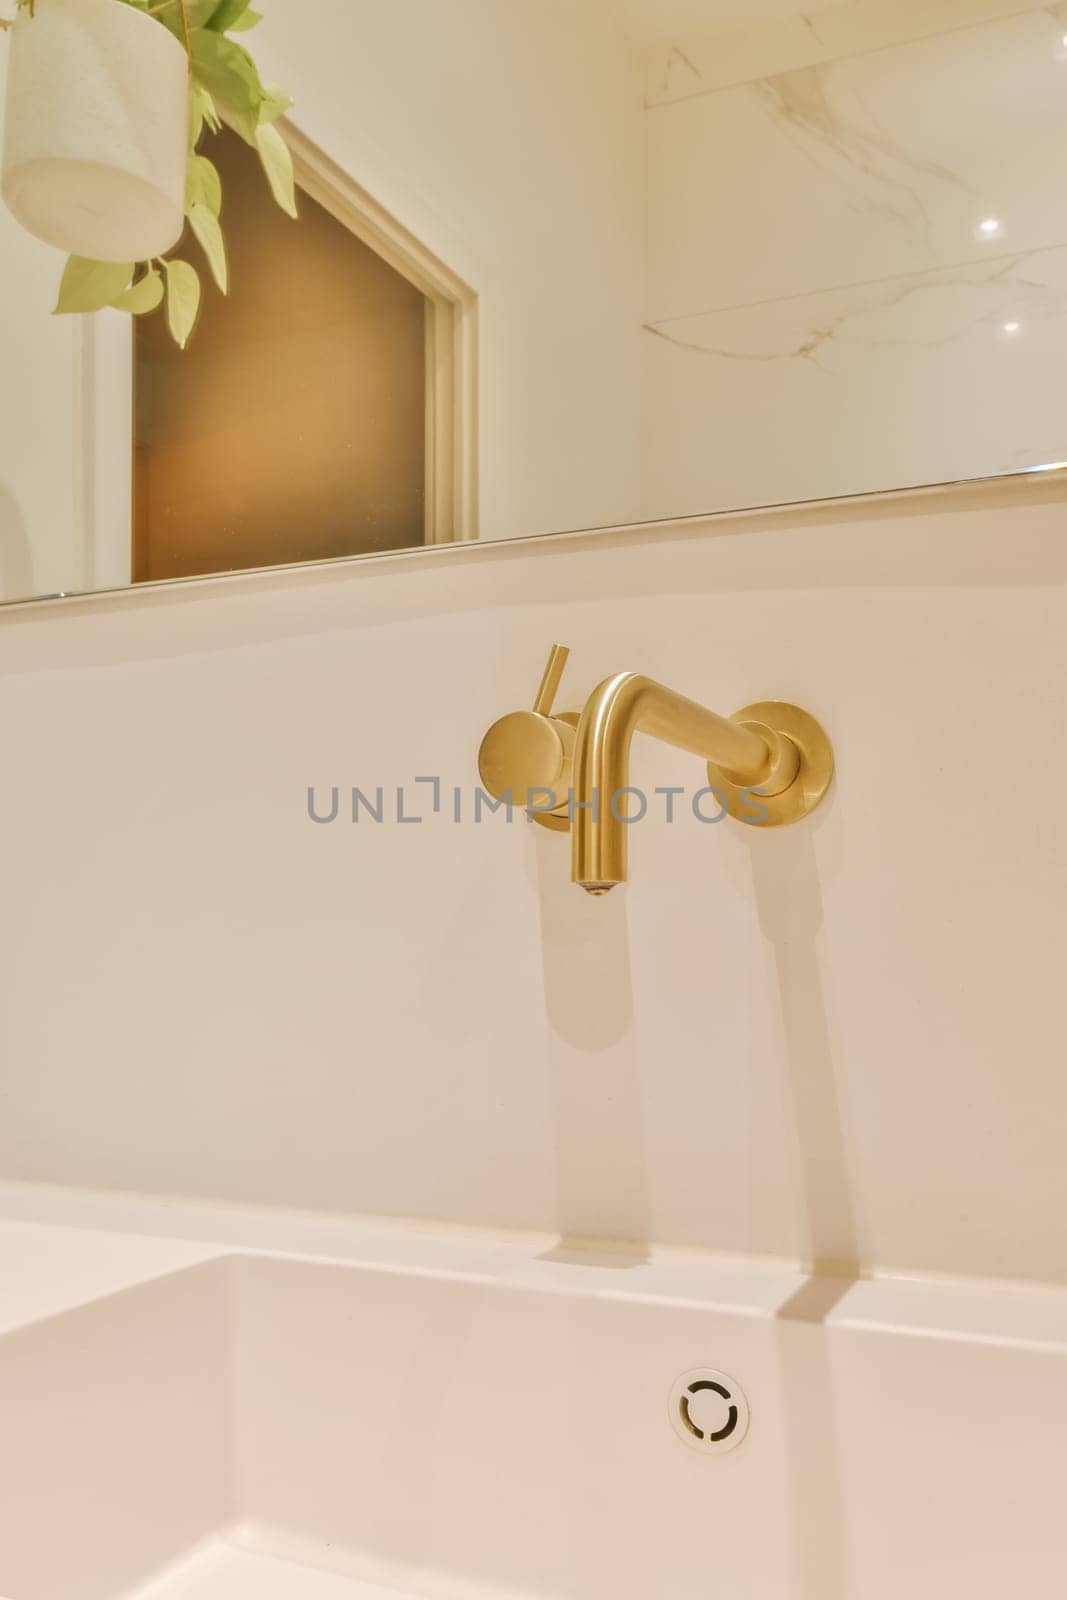 a white bathroom sink with gold fauced handles and brass fixtures on the wall mounted fauced handle